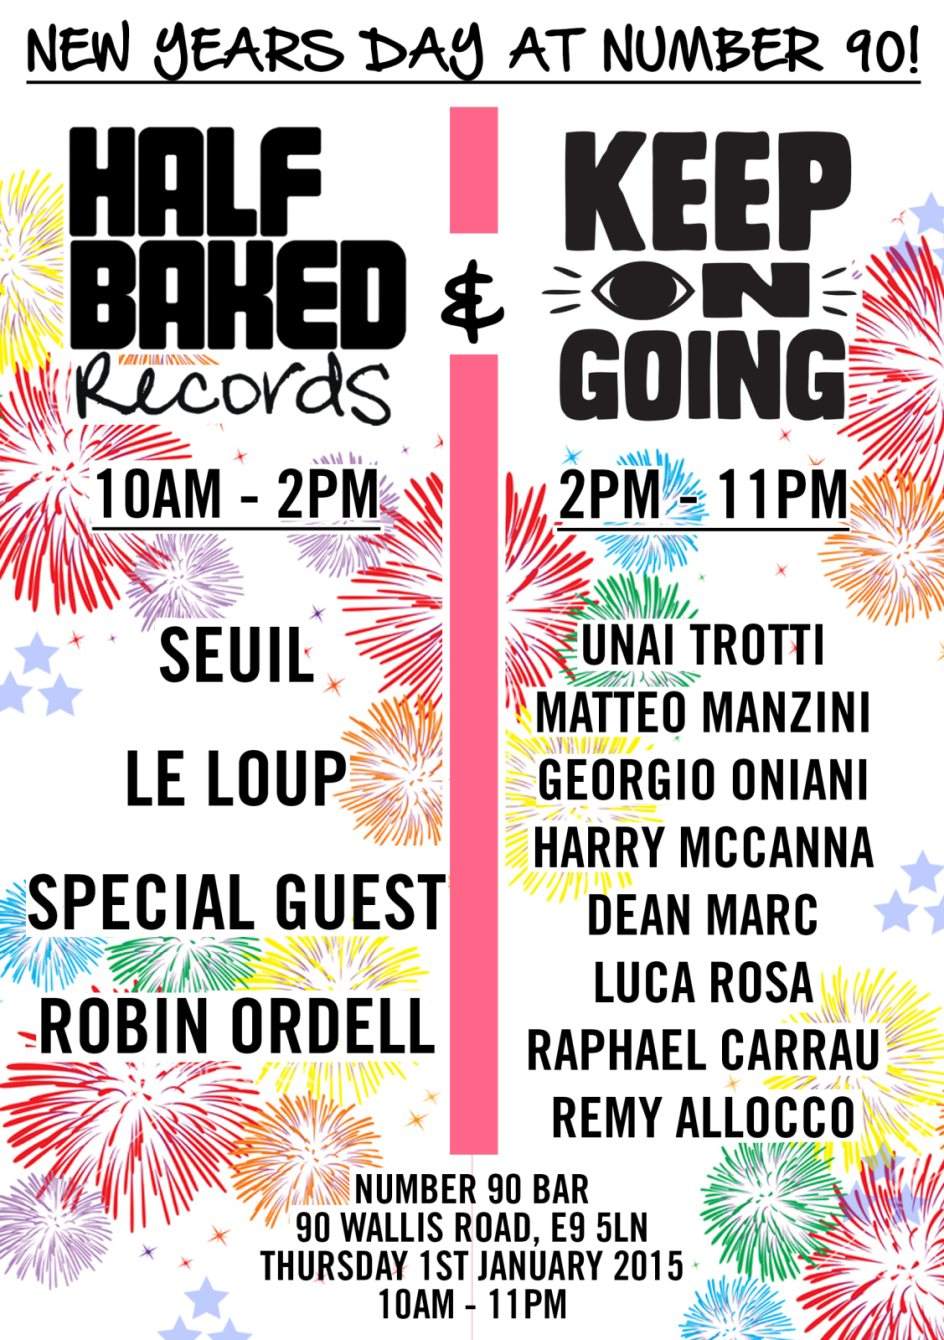 Keep on Going & Half Baked - New Years Day 14 Hours Party By the Canal - Página frontal